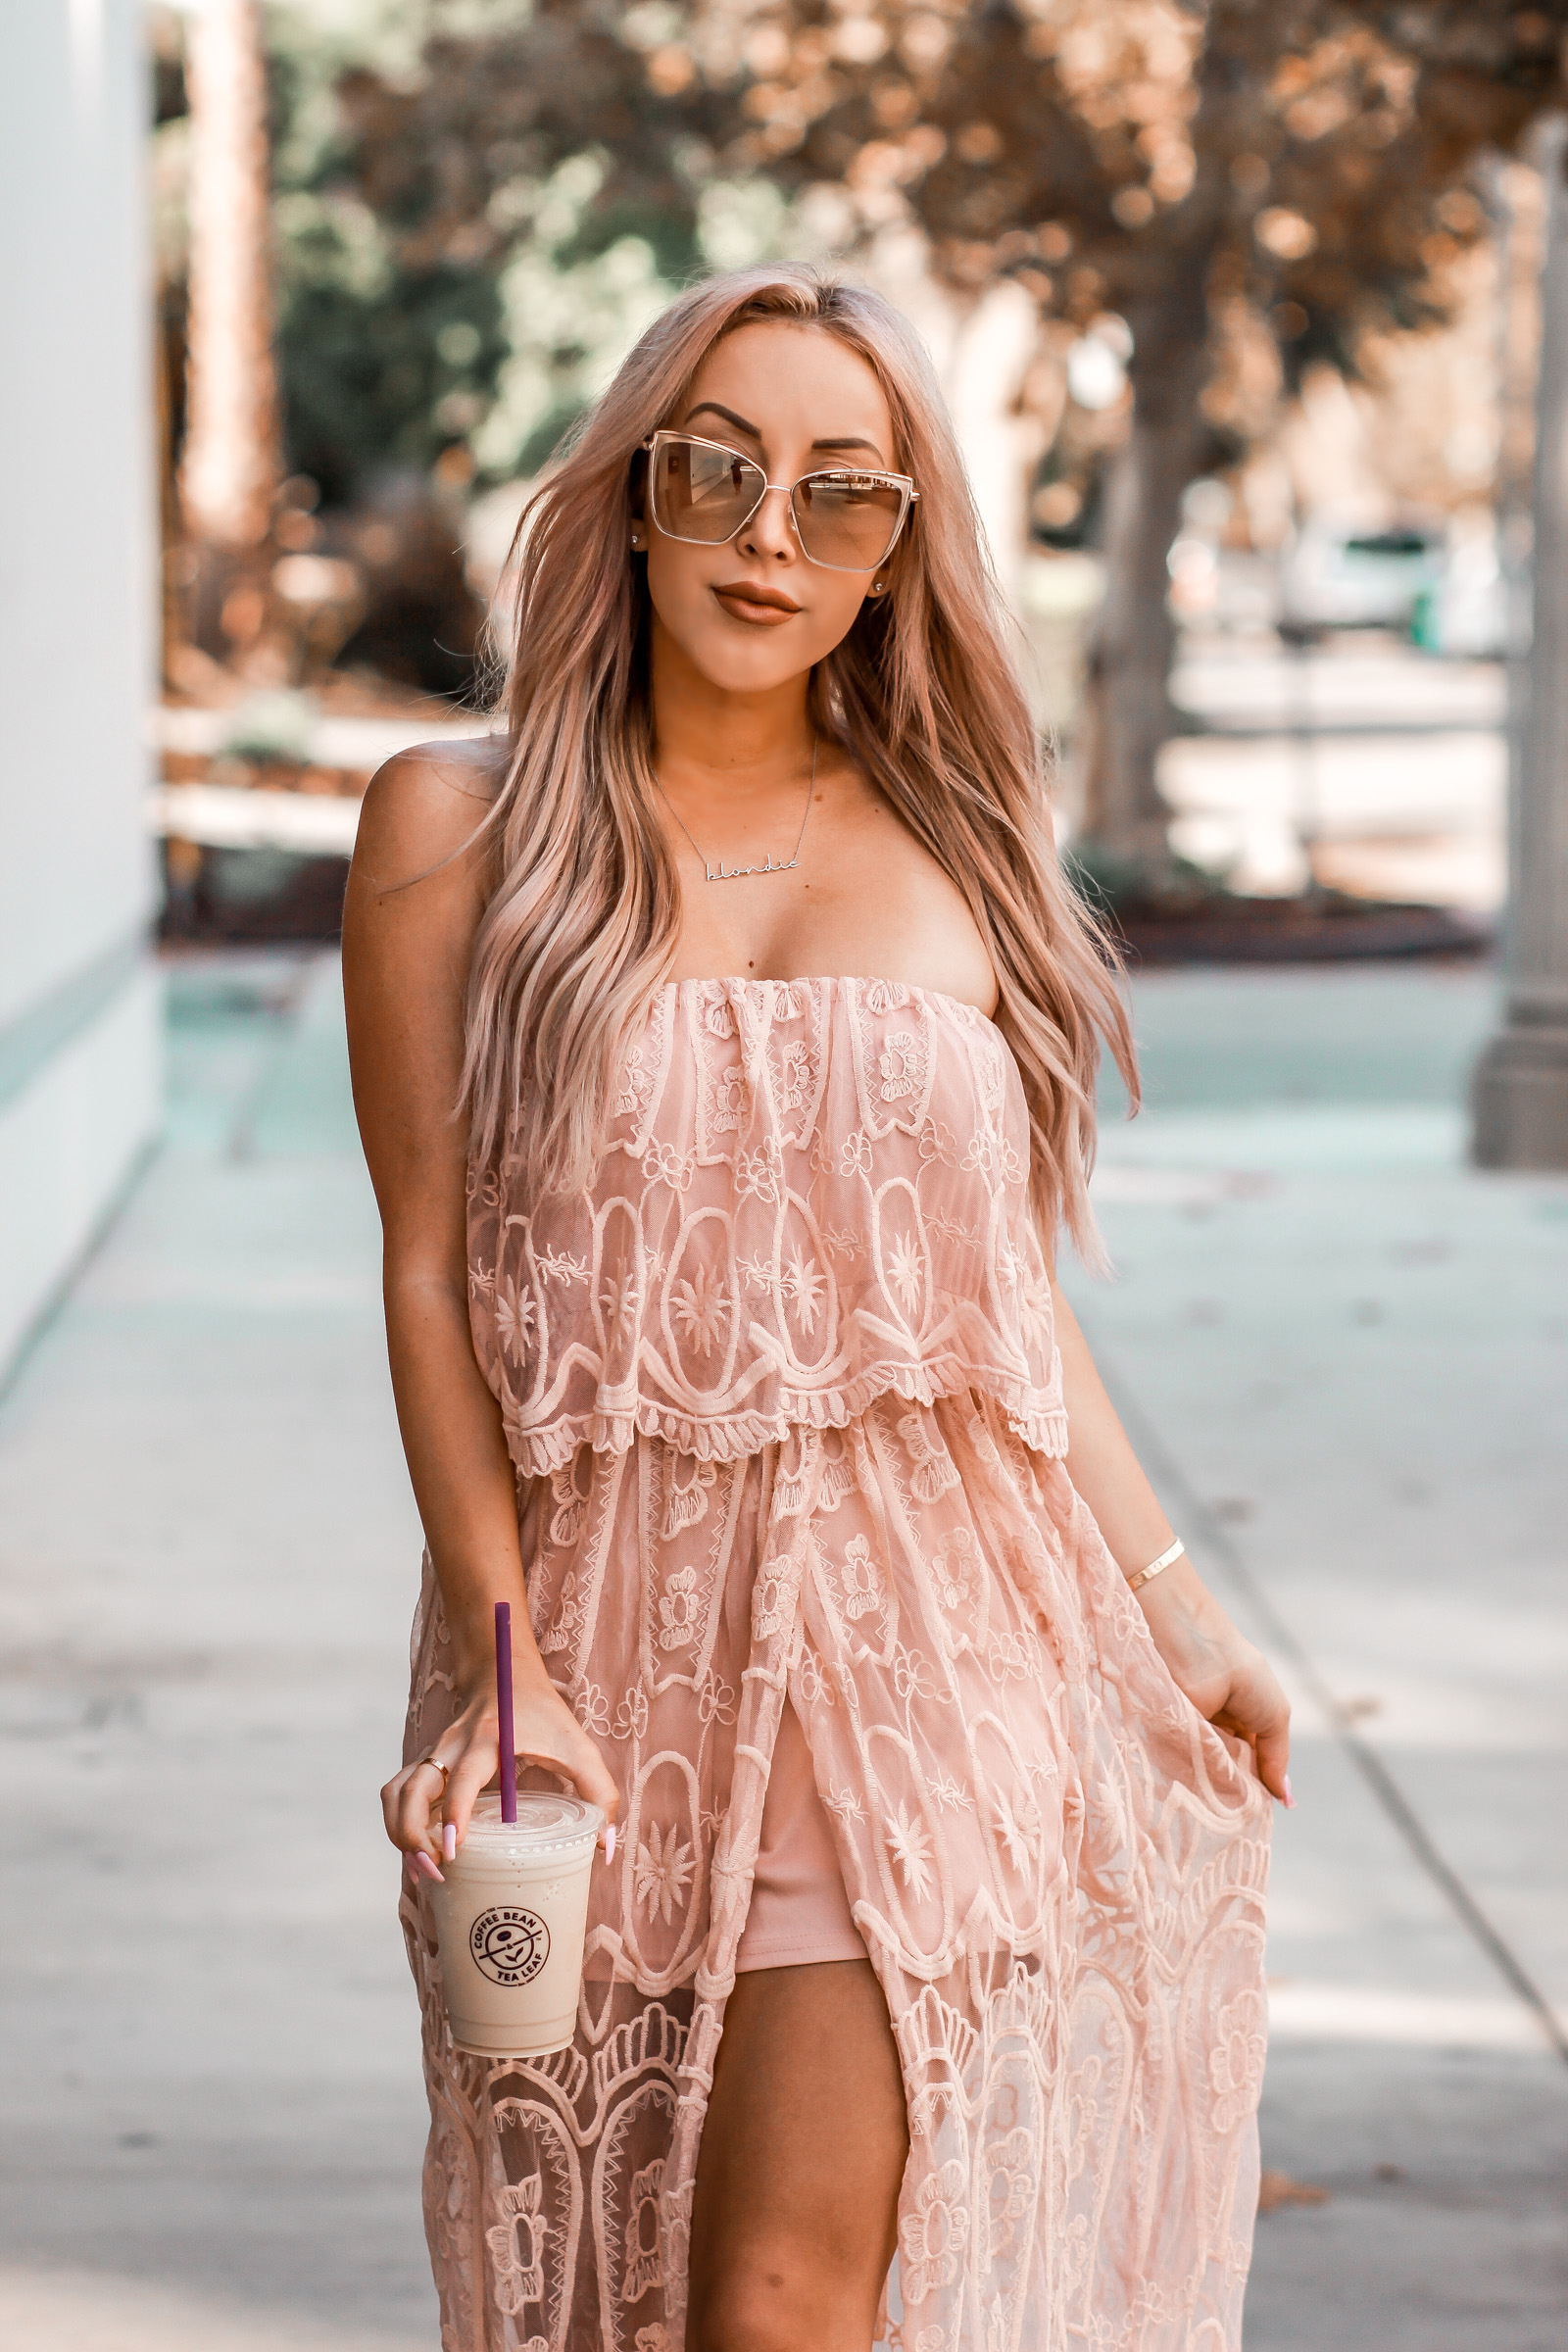 Pink Hair & Pink Lace | Rose Gold Hair |Diff Eyewear | Blondie in the City by Hayley Larue